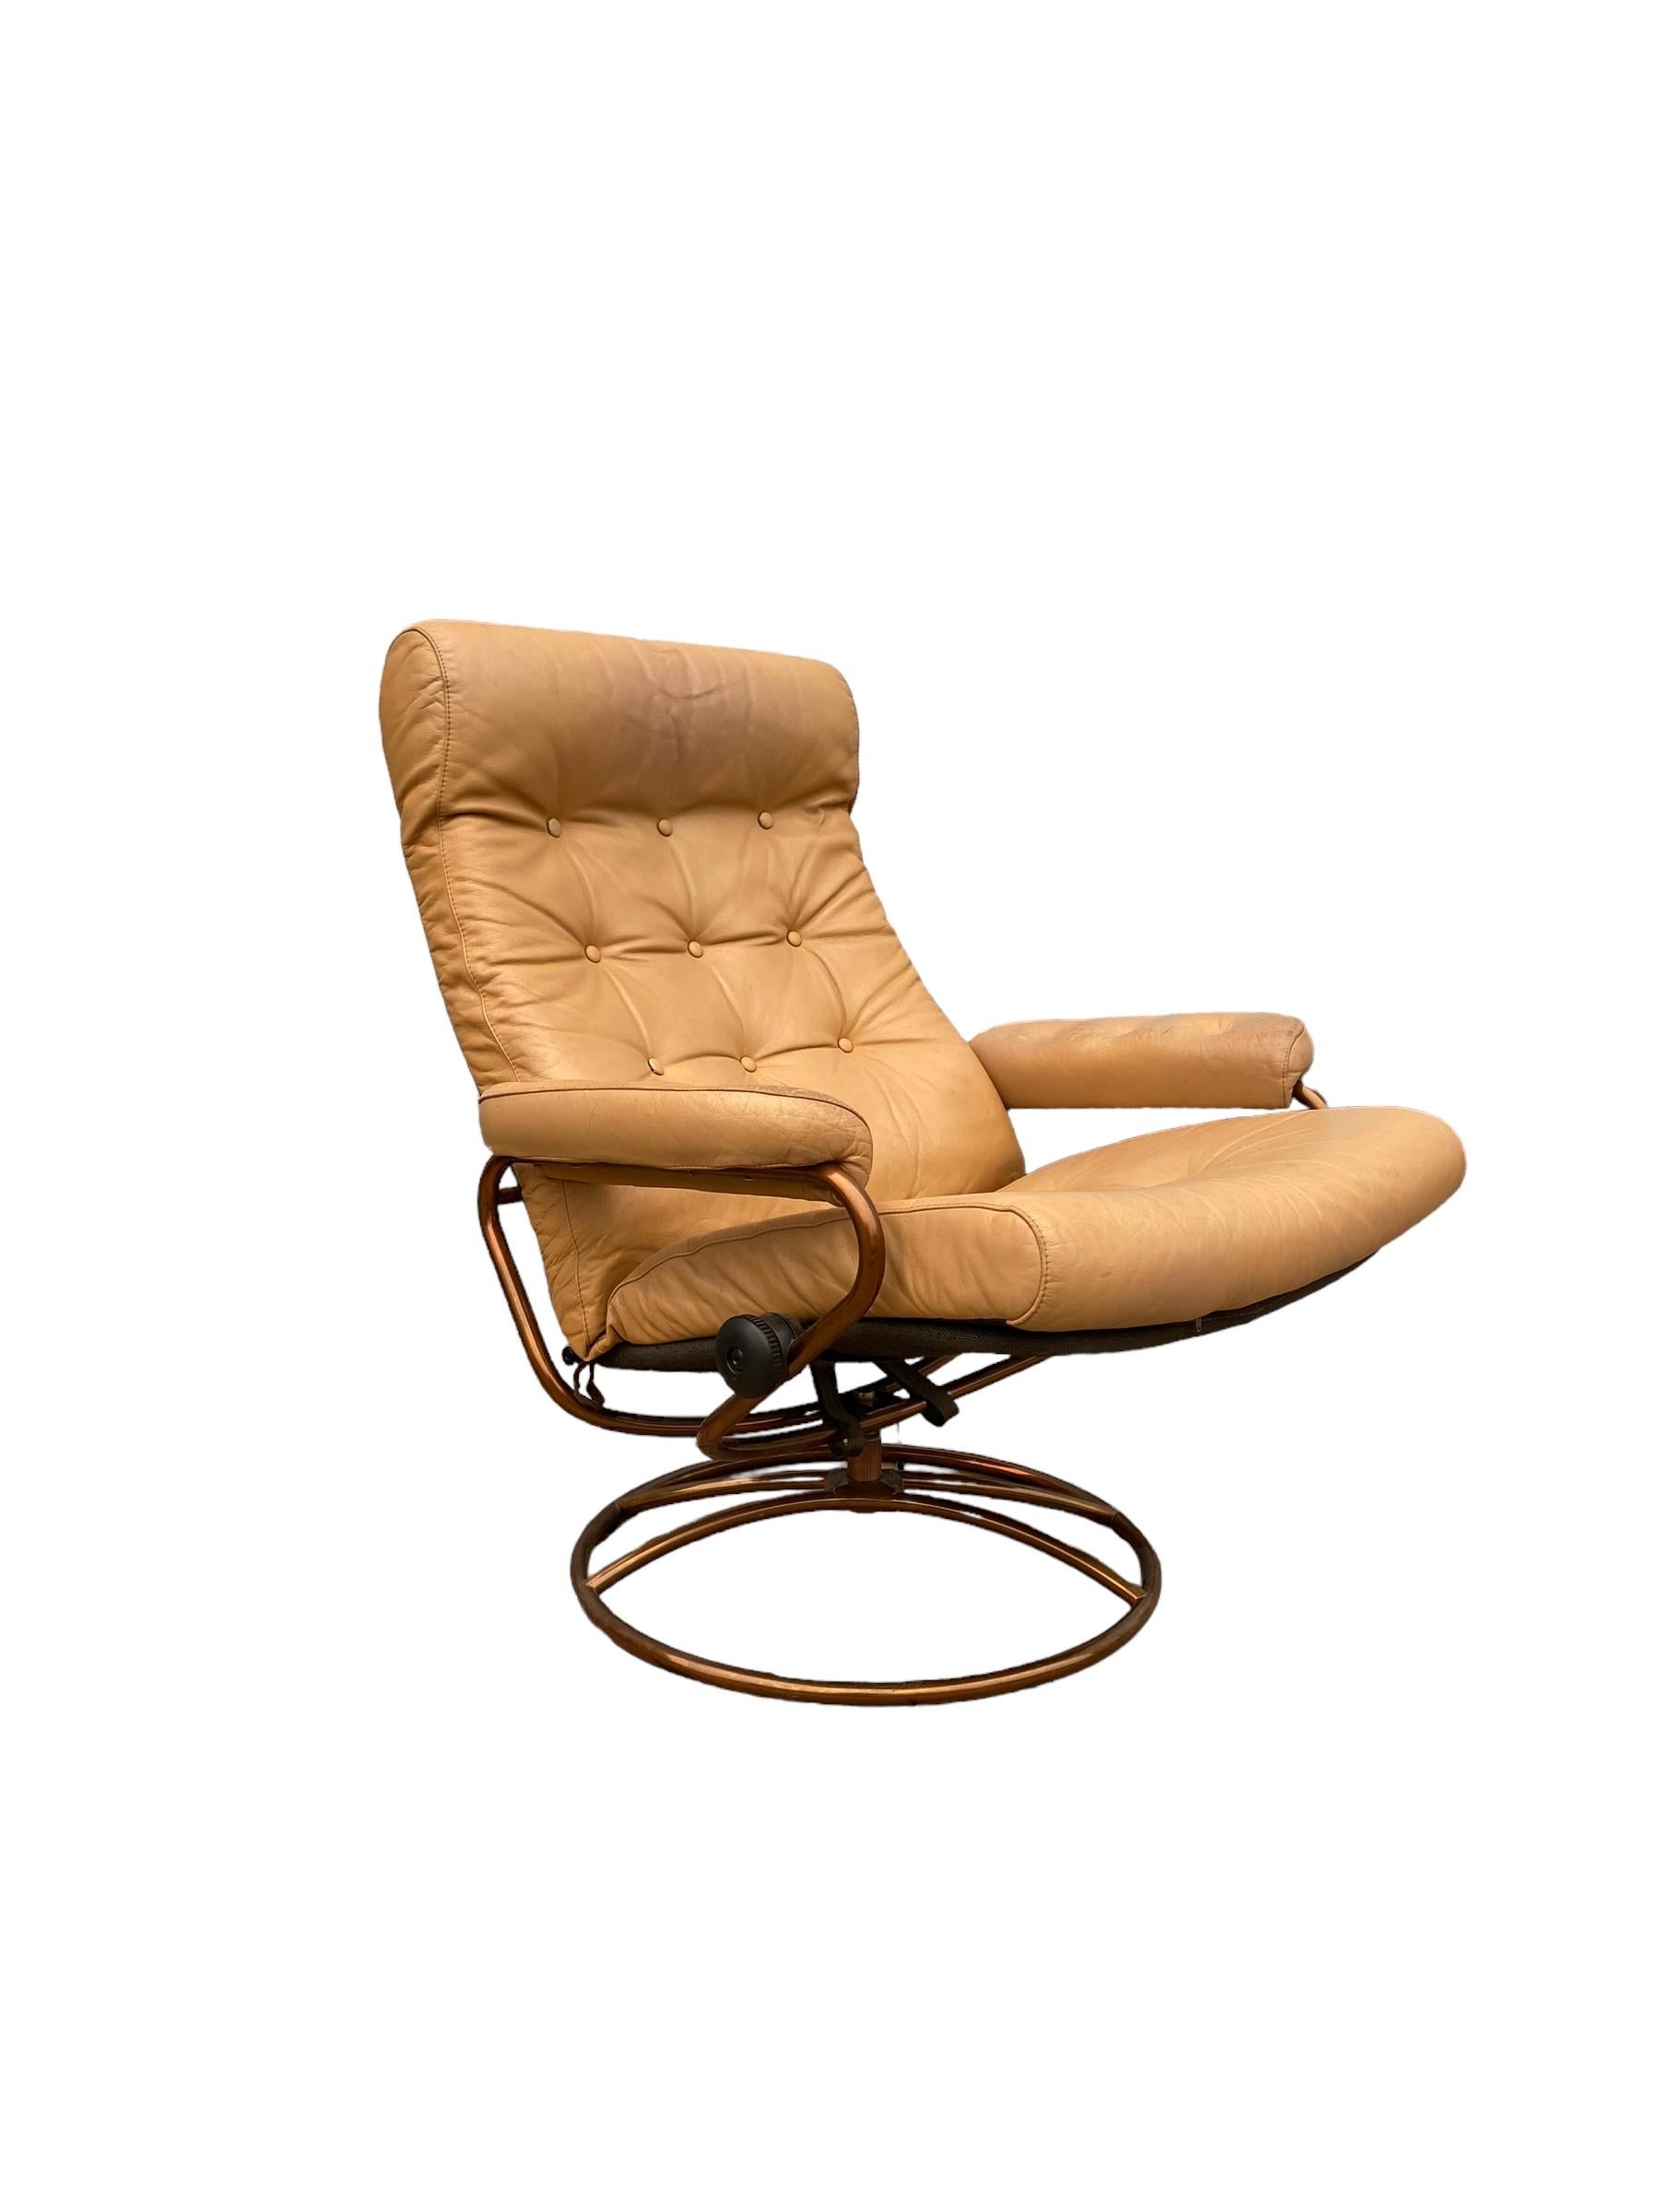 Ekornes Stressless Reclining Lounge Chair and Ottoman in Cream with Copper Frame In Fair Condition For Sale In Brooklyn, NY